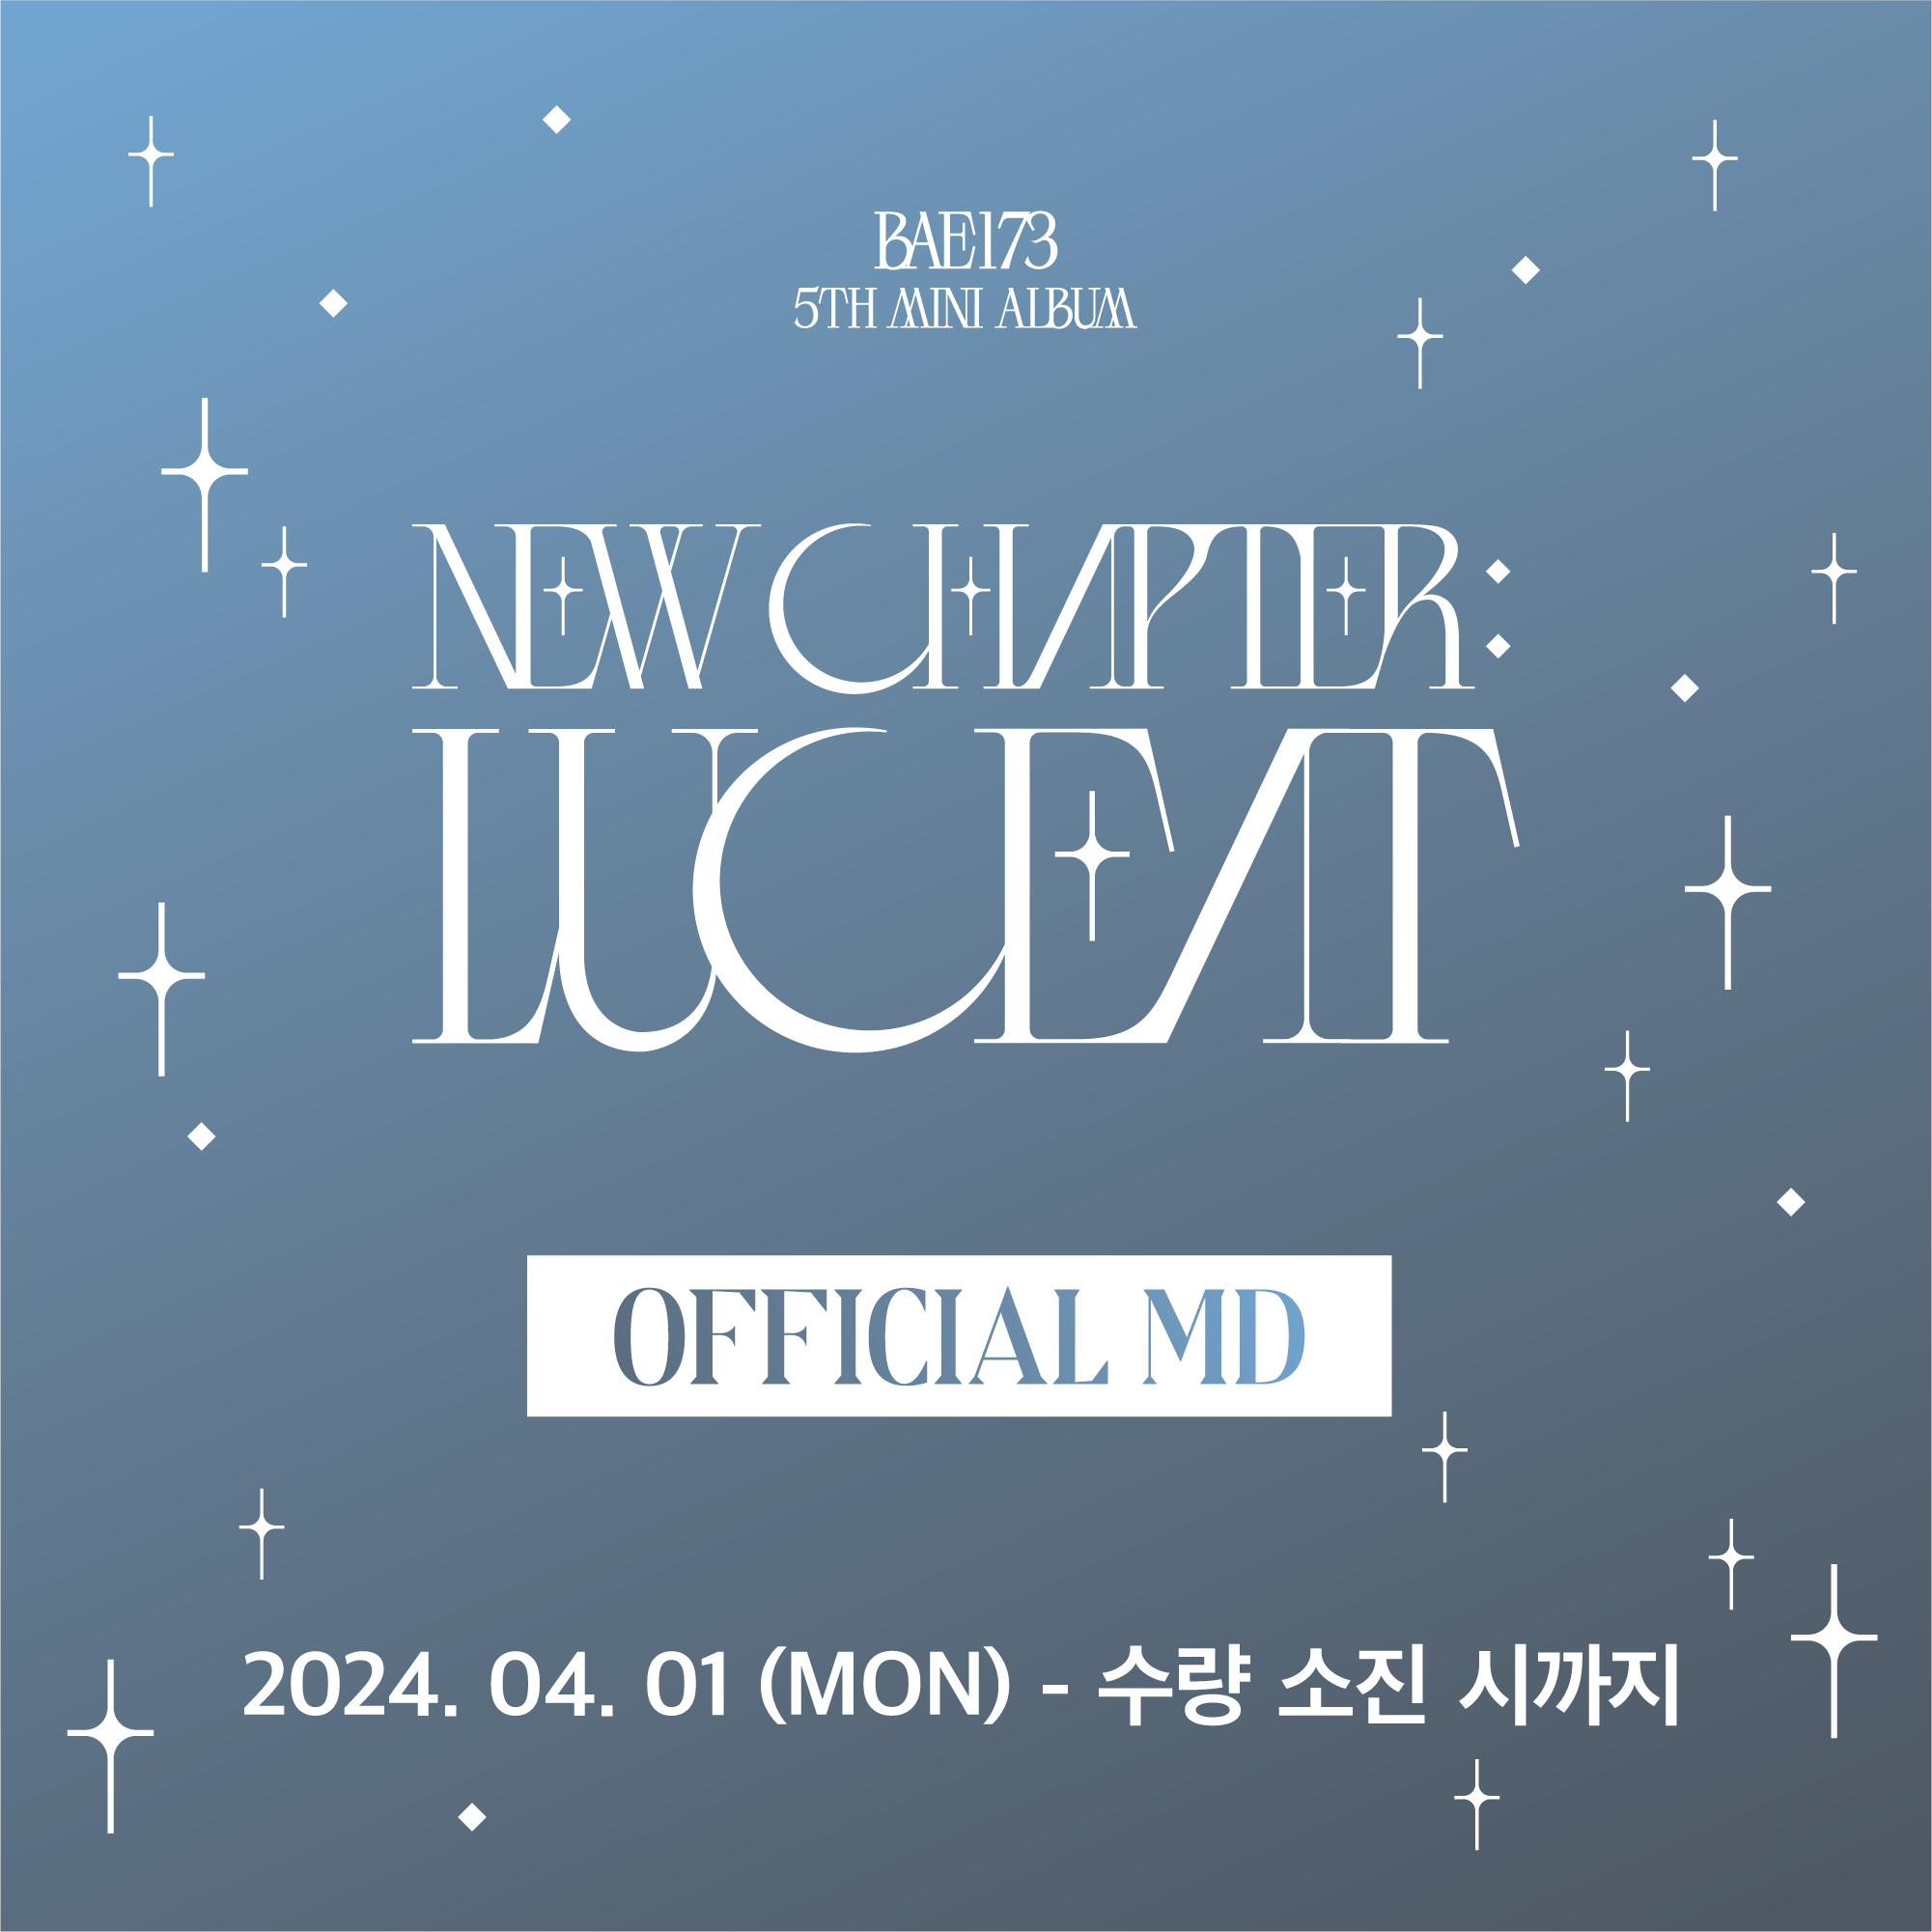 BAE173 5TH MINI ALBUM [NEW CHAPTER : LUCEAT] OFFICIAL MD